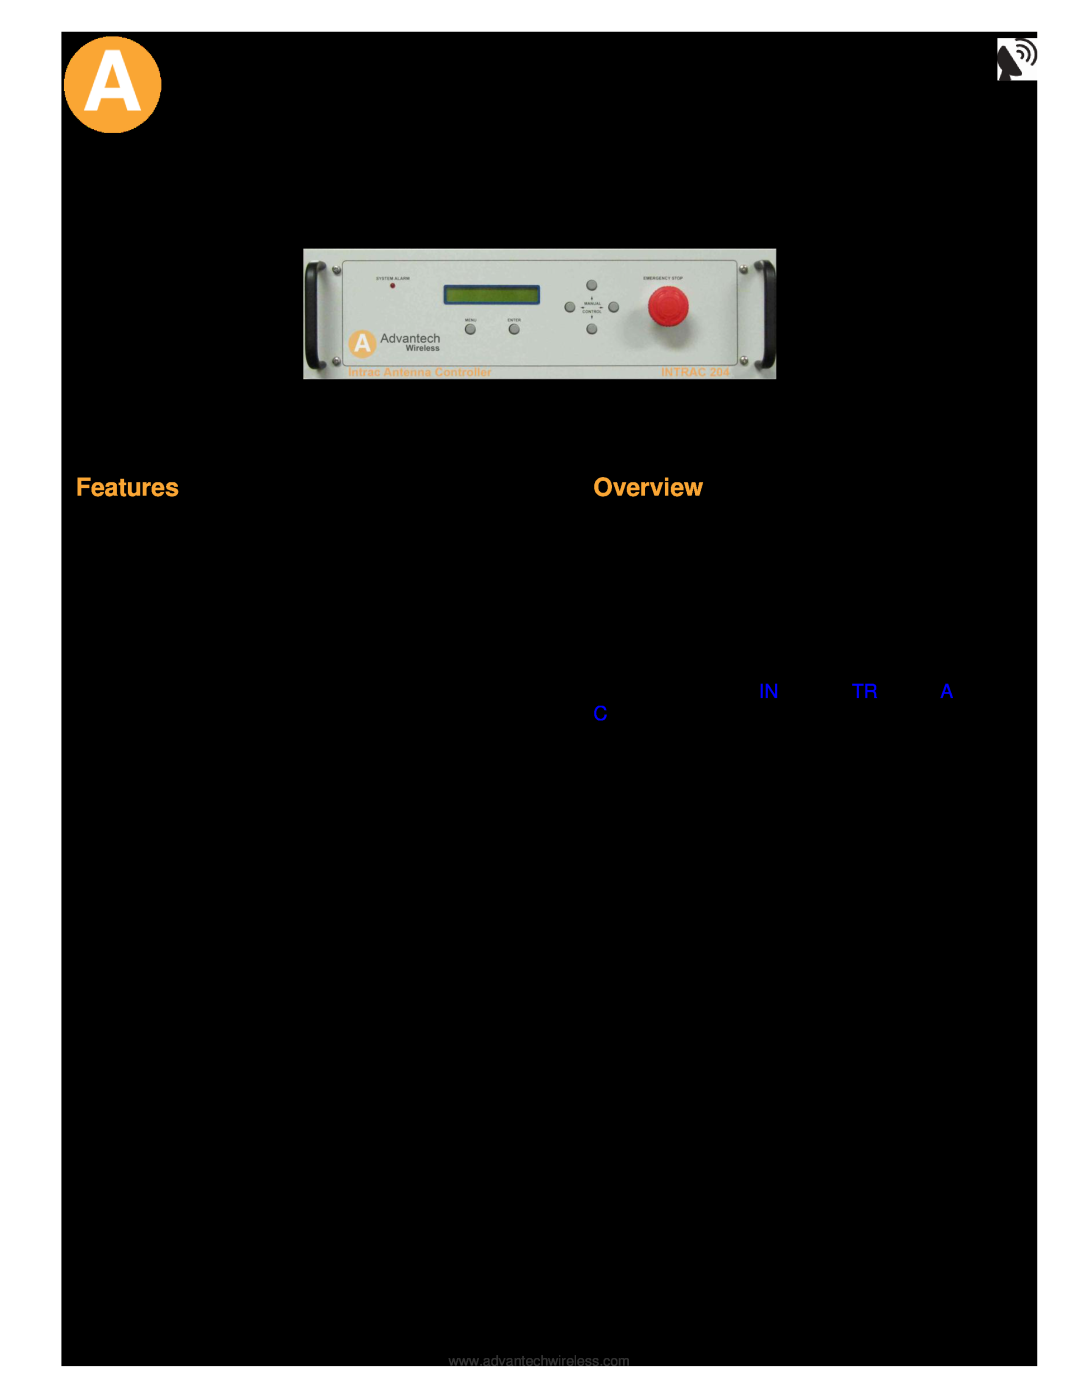 Advantech specifications INTRAC 204 Antenna Control Unit, Features, Overview 